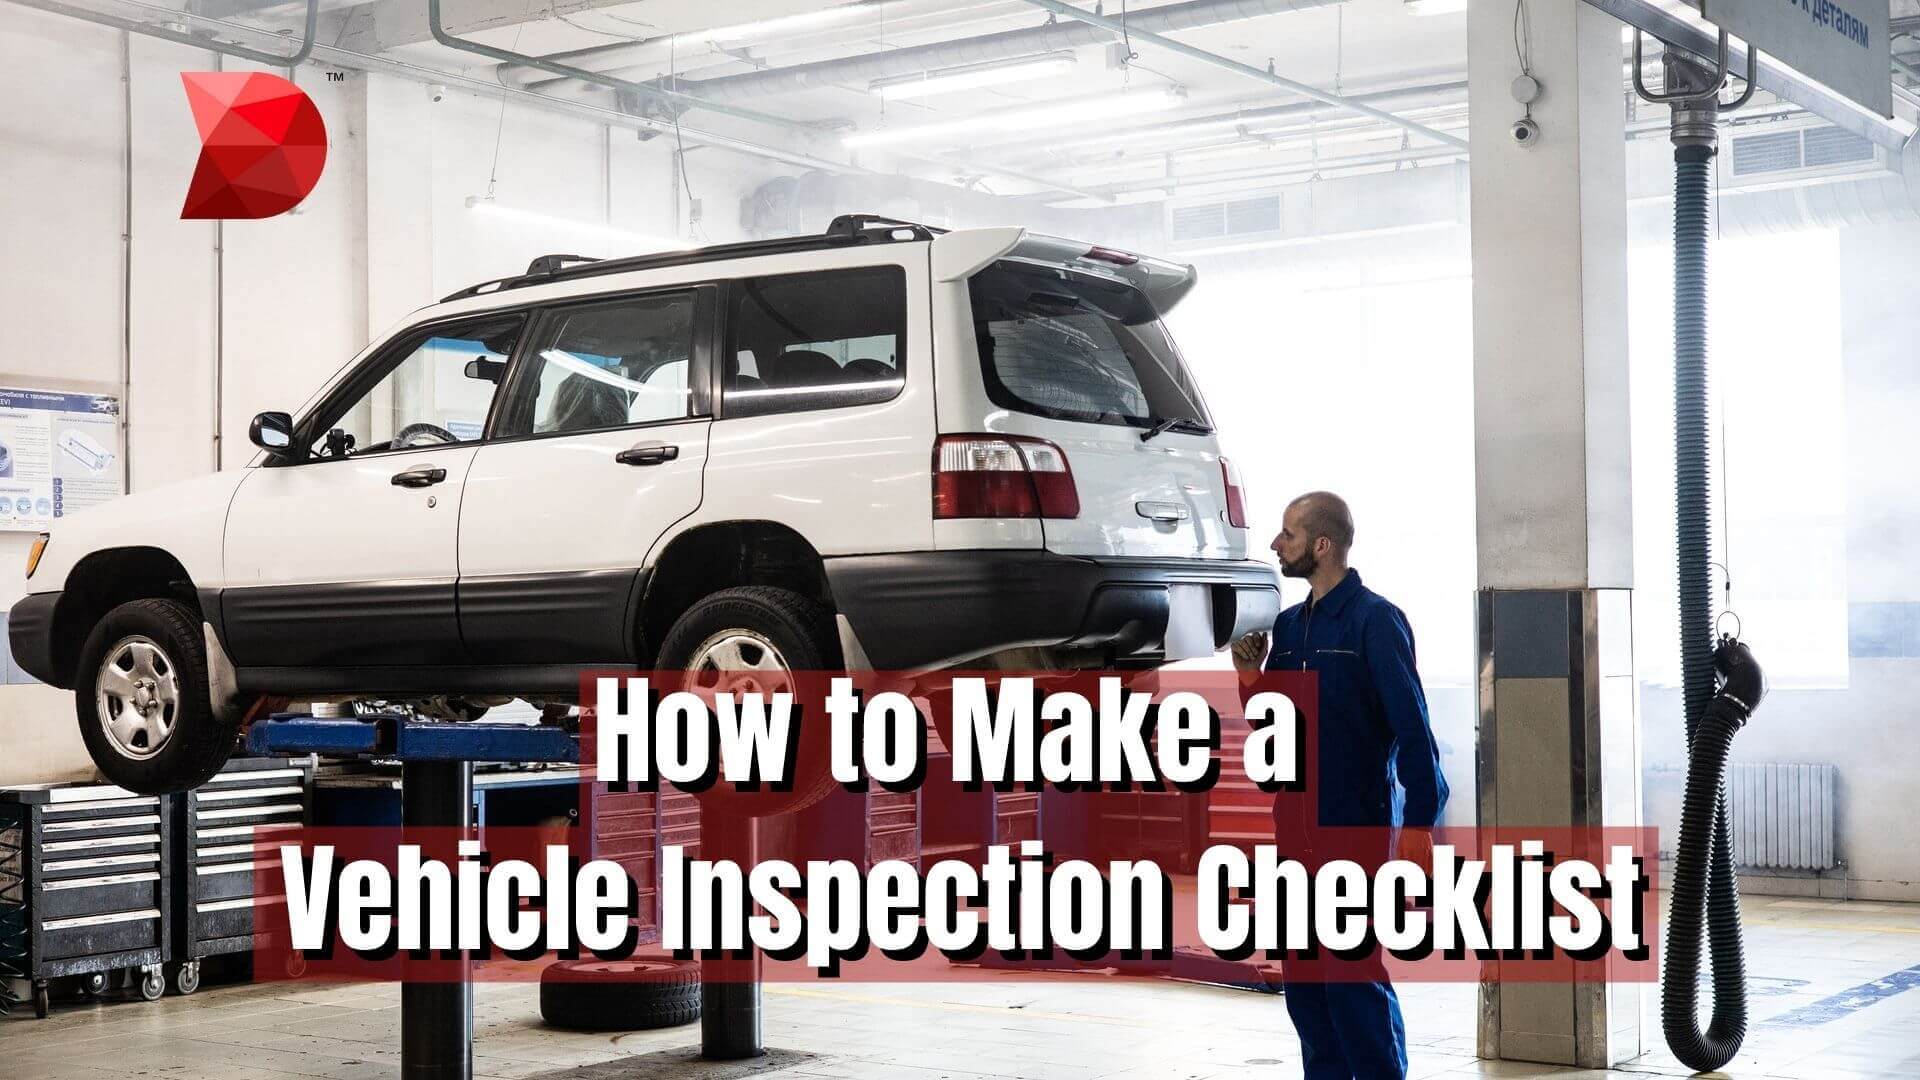 We will discuss everything you need to know about a vehicle inspection checklist, including how to make one. Read here to learn more!